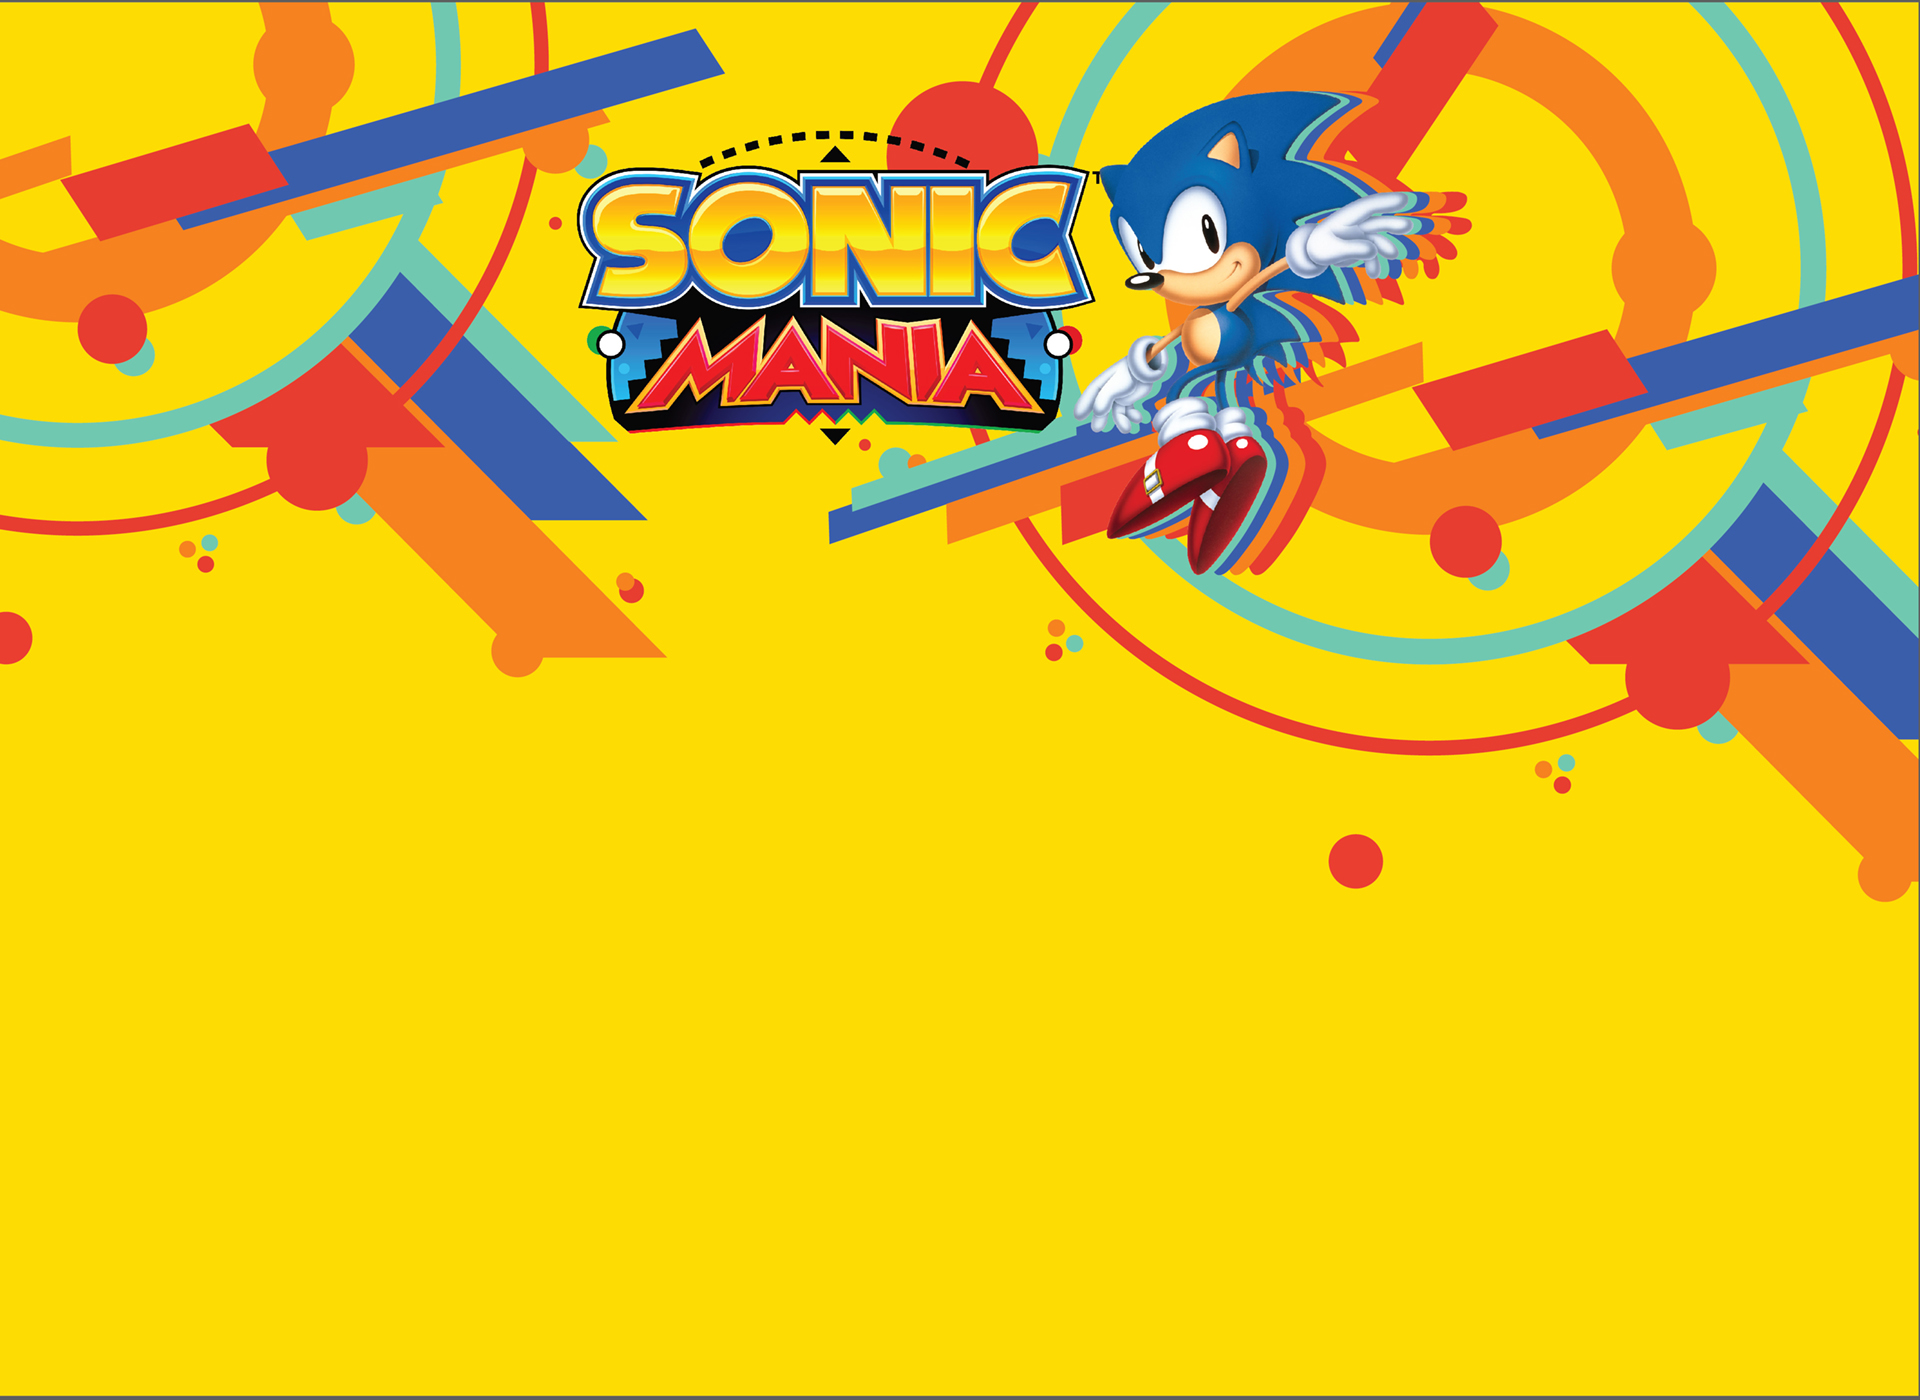 Sonic Sonic The Hedgehog Sonic Mania Adventures Sonic Mania Sega Mighty Tails Character Knuckles Com 1920x1400